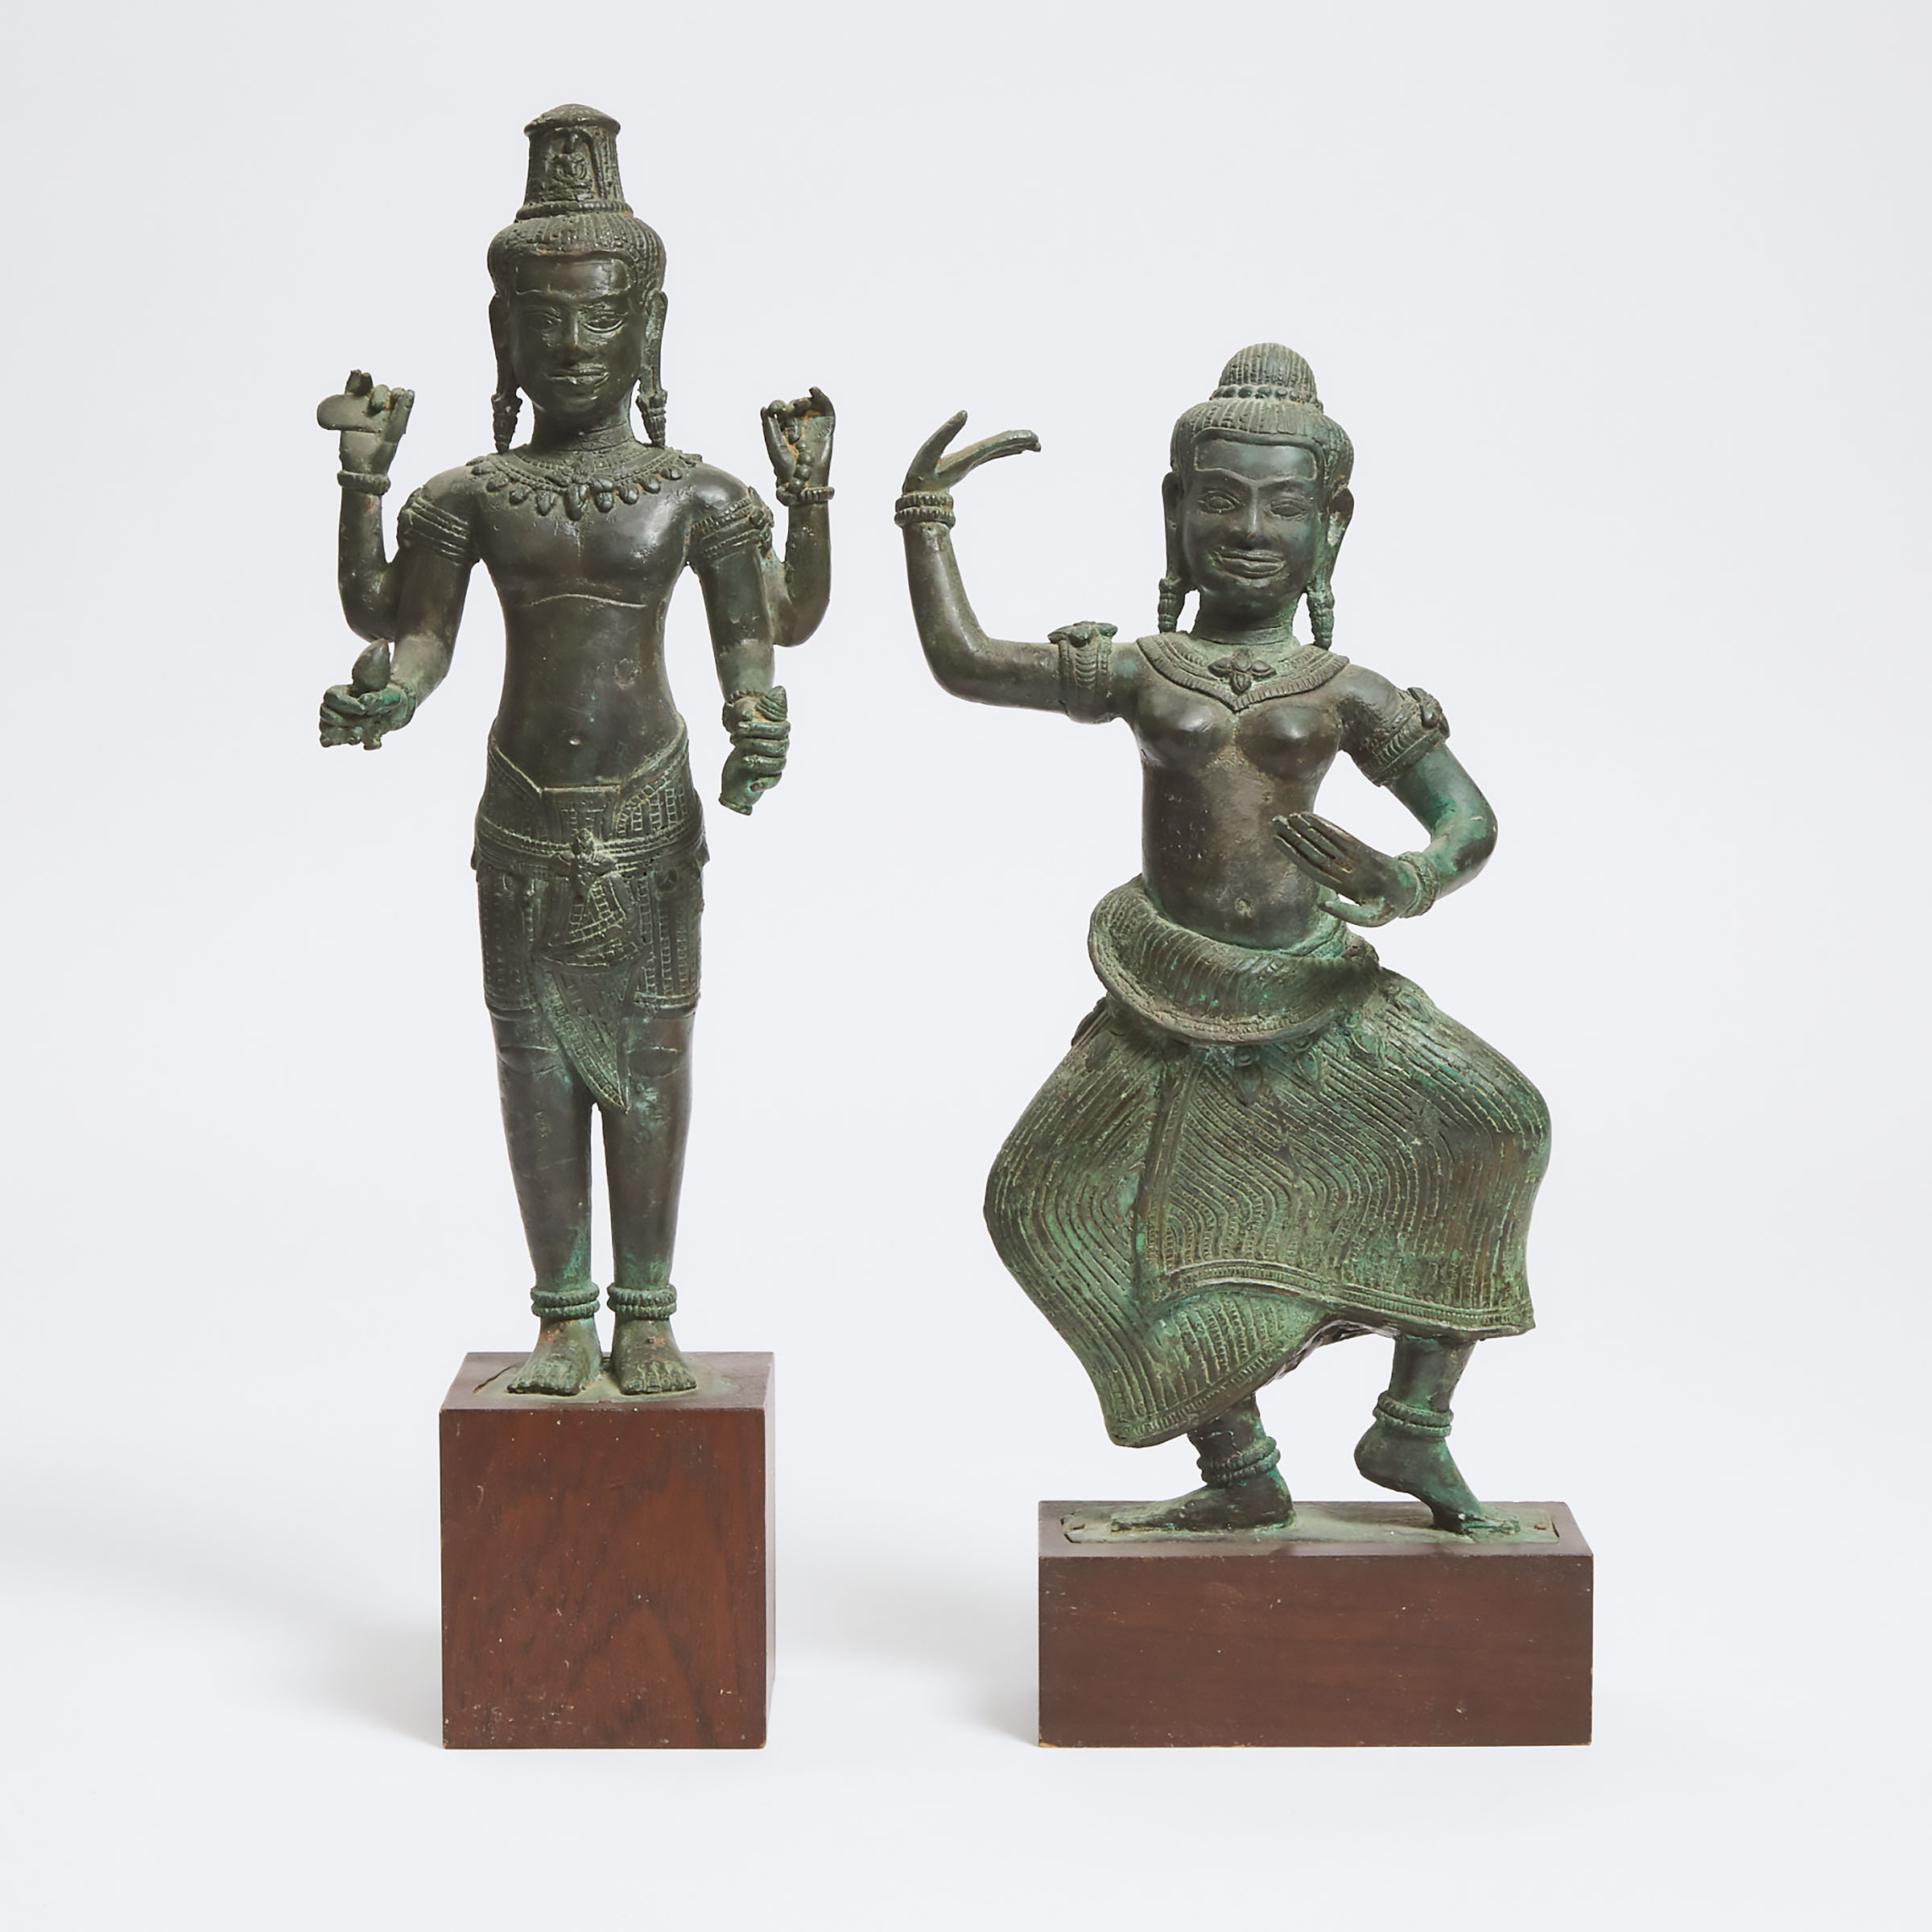 Two Khmer Bronze Figures of a Four-Armed Deity and a Dancer, 18th Century or Later